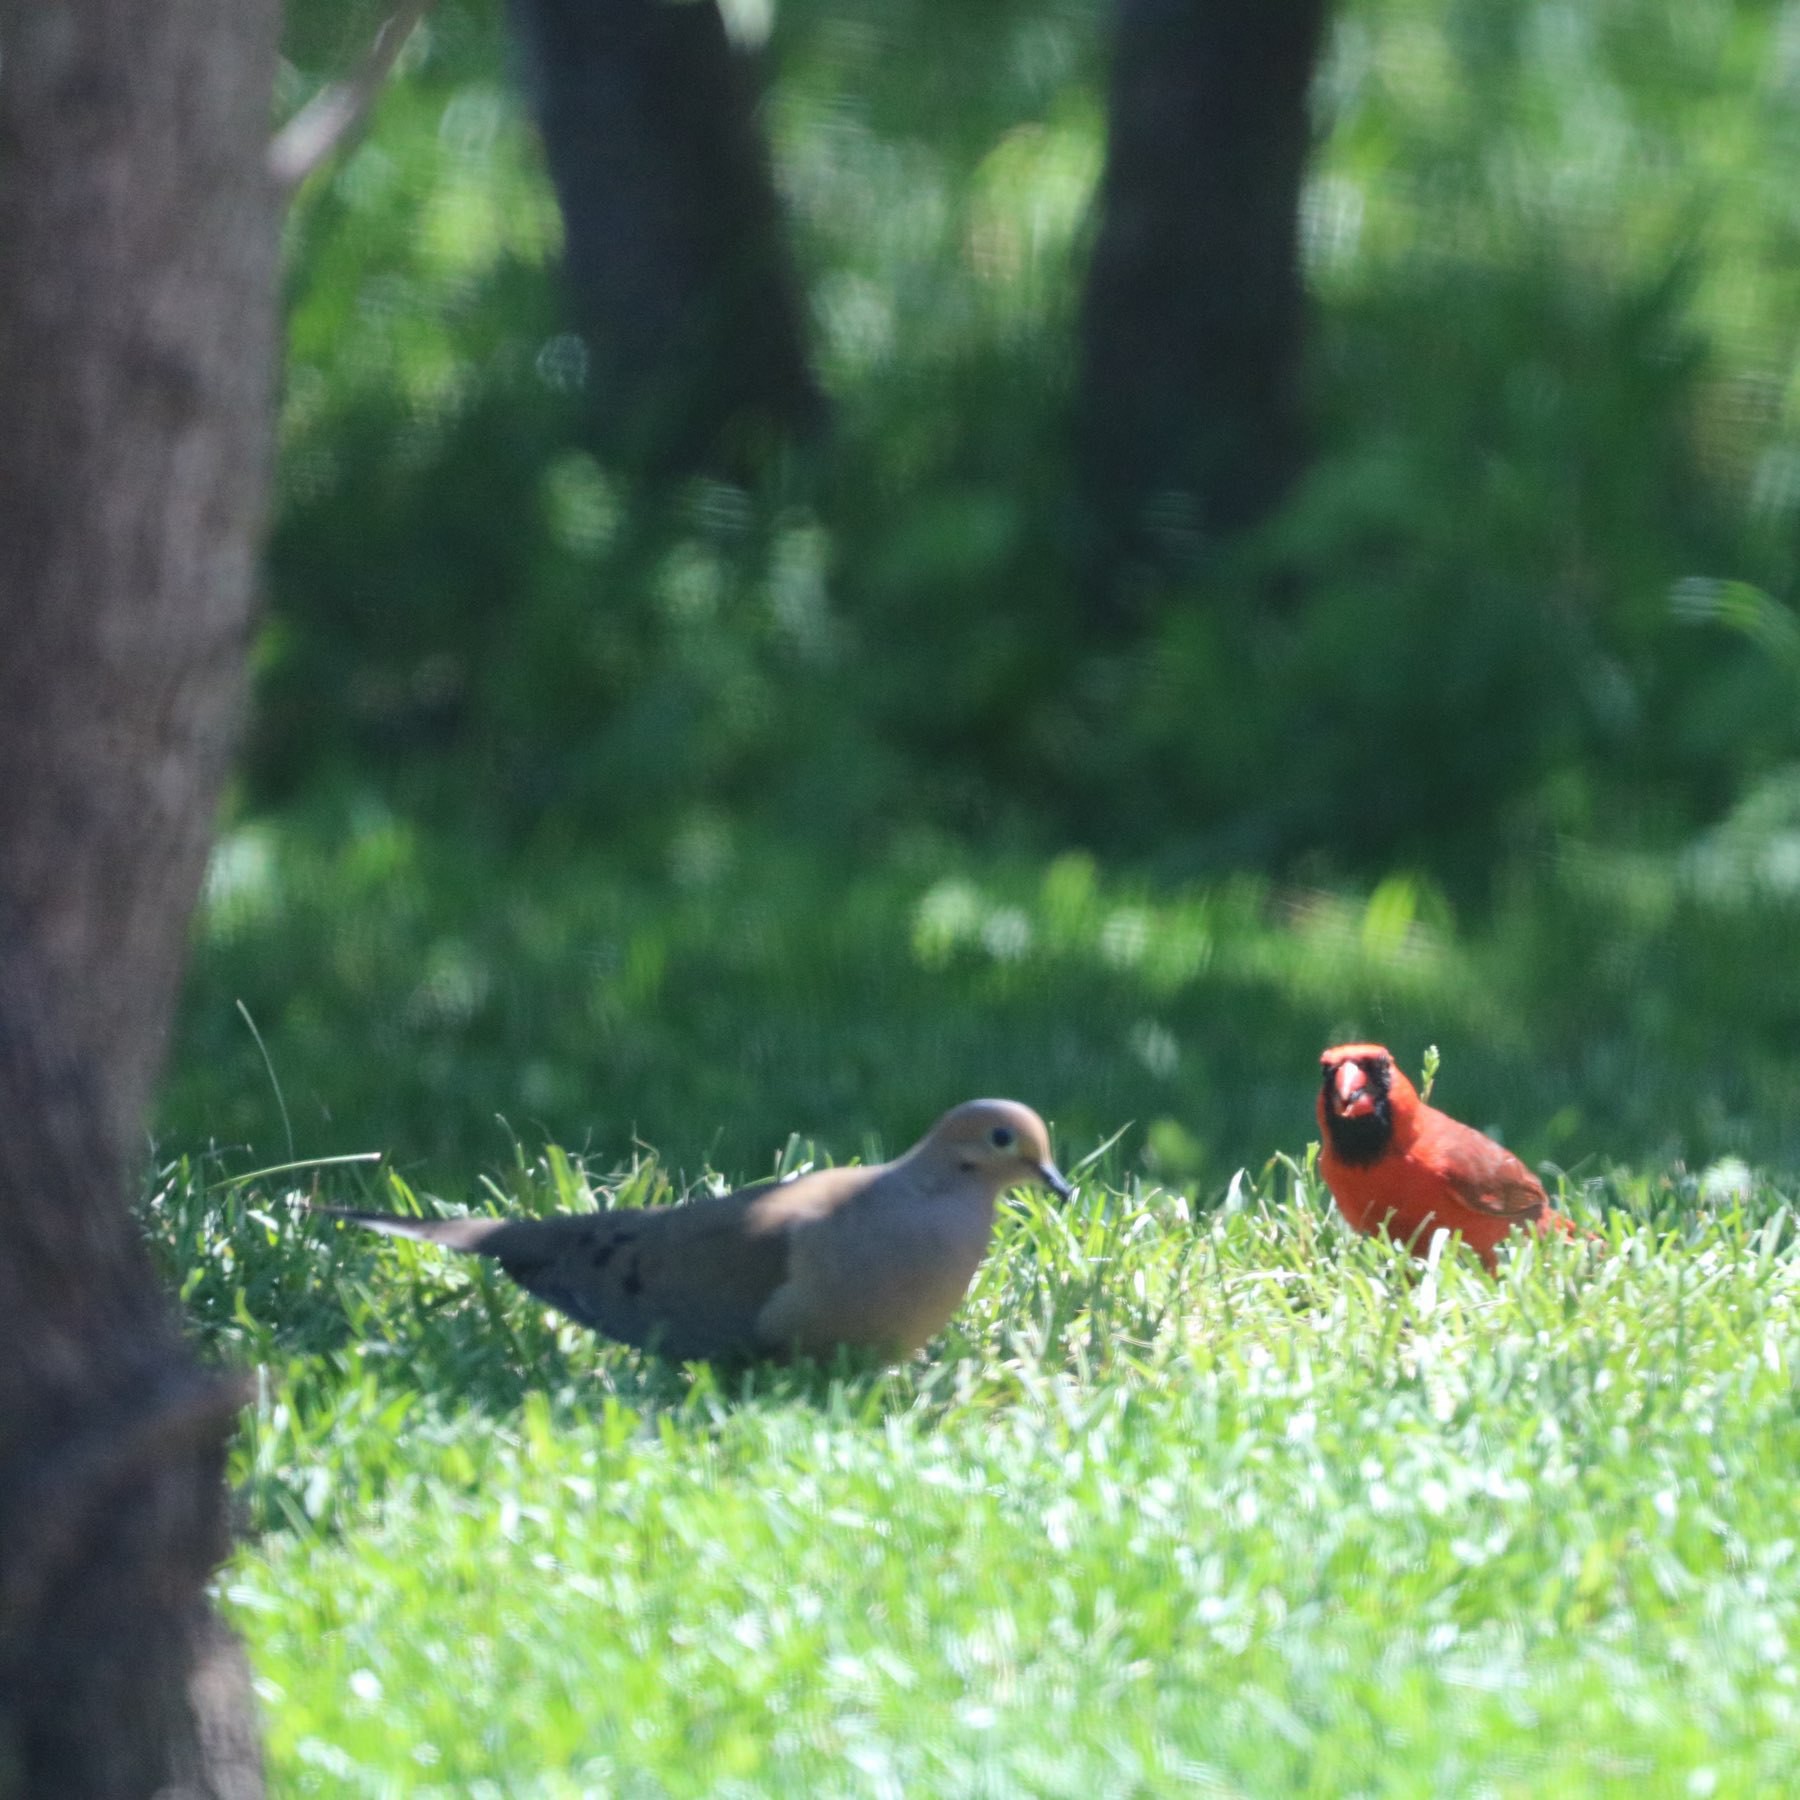 a cardinal and a mourning dove  on the grass under a tree. The cardinal has something in its mouth